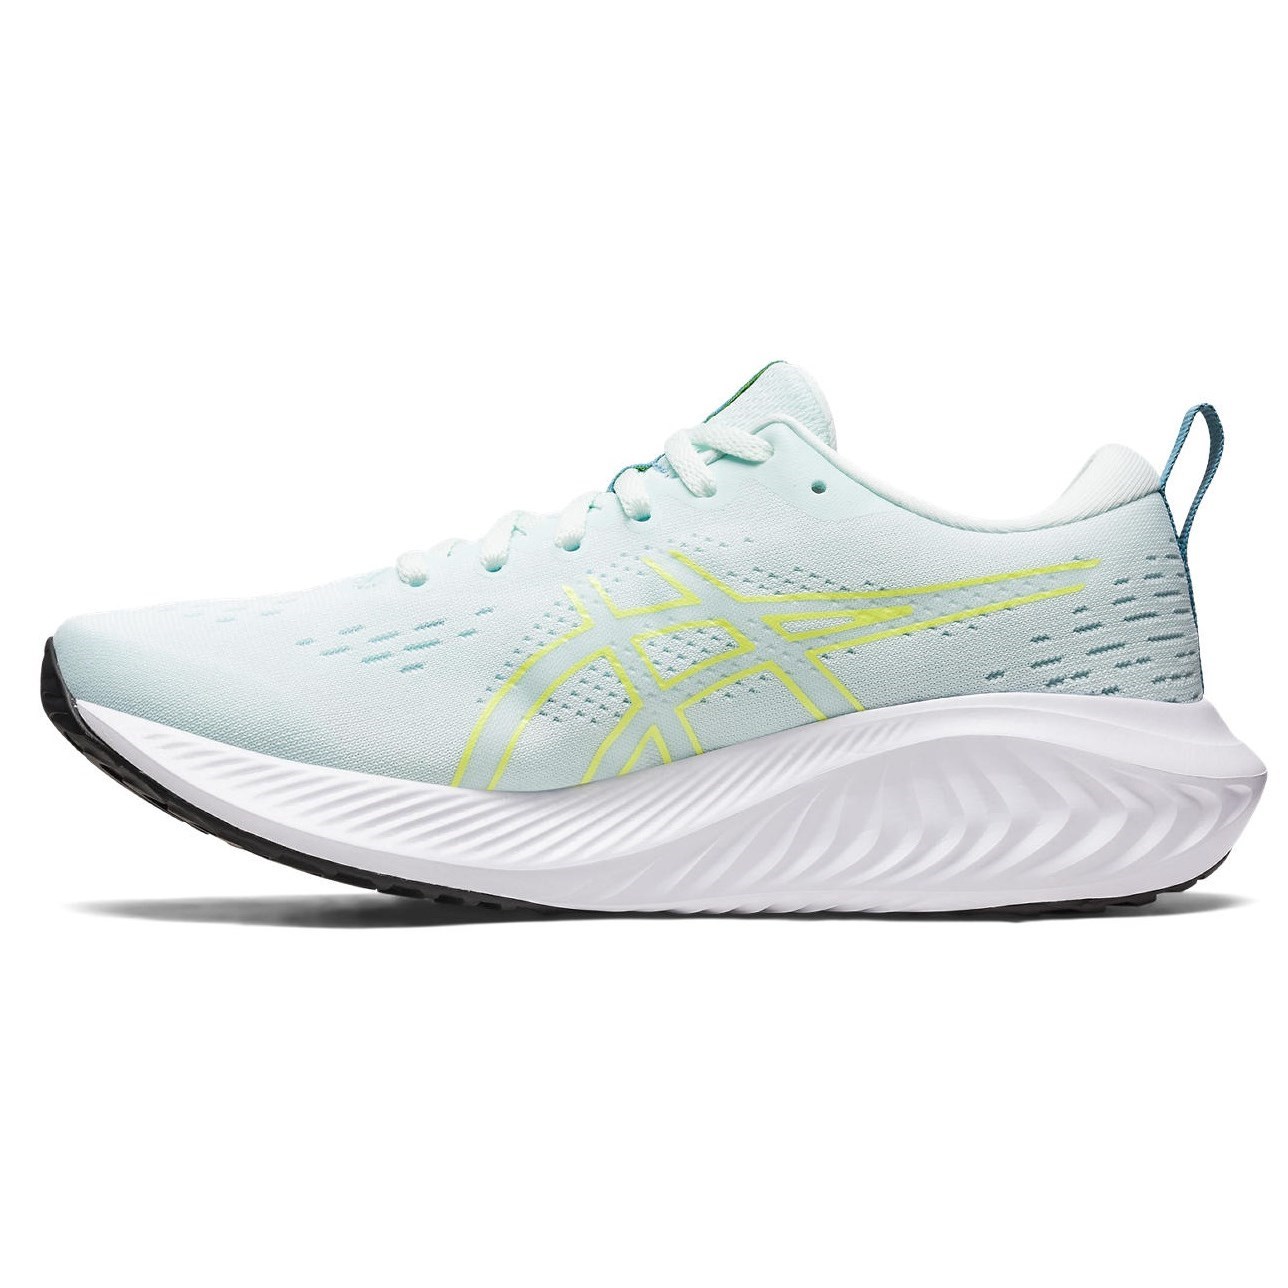 Asics Gel Excite 10 - Womens Running Shoes - Soothing Sea/Glow Yellow ...